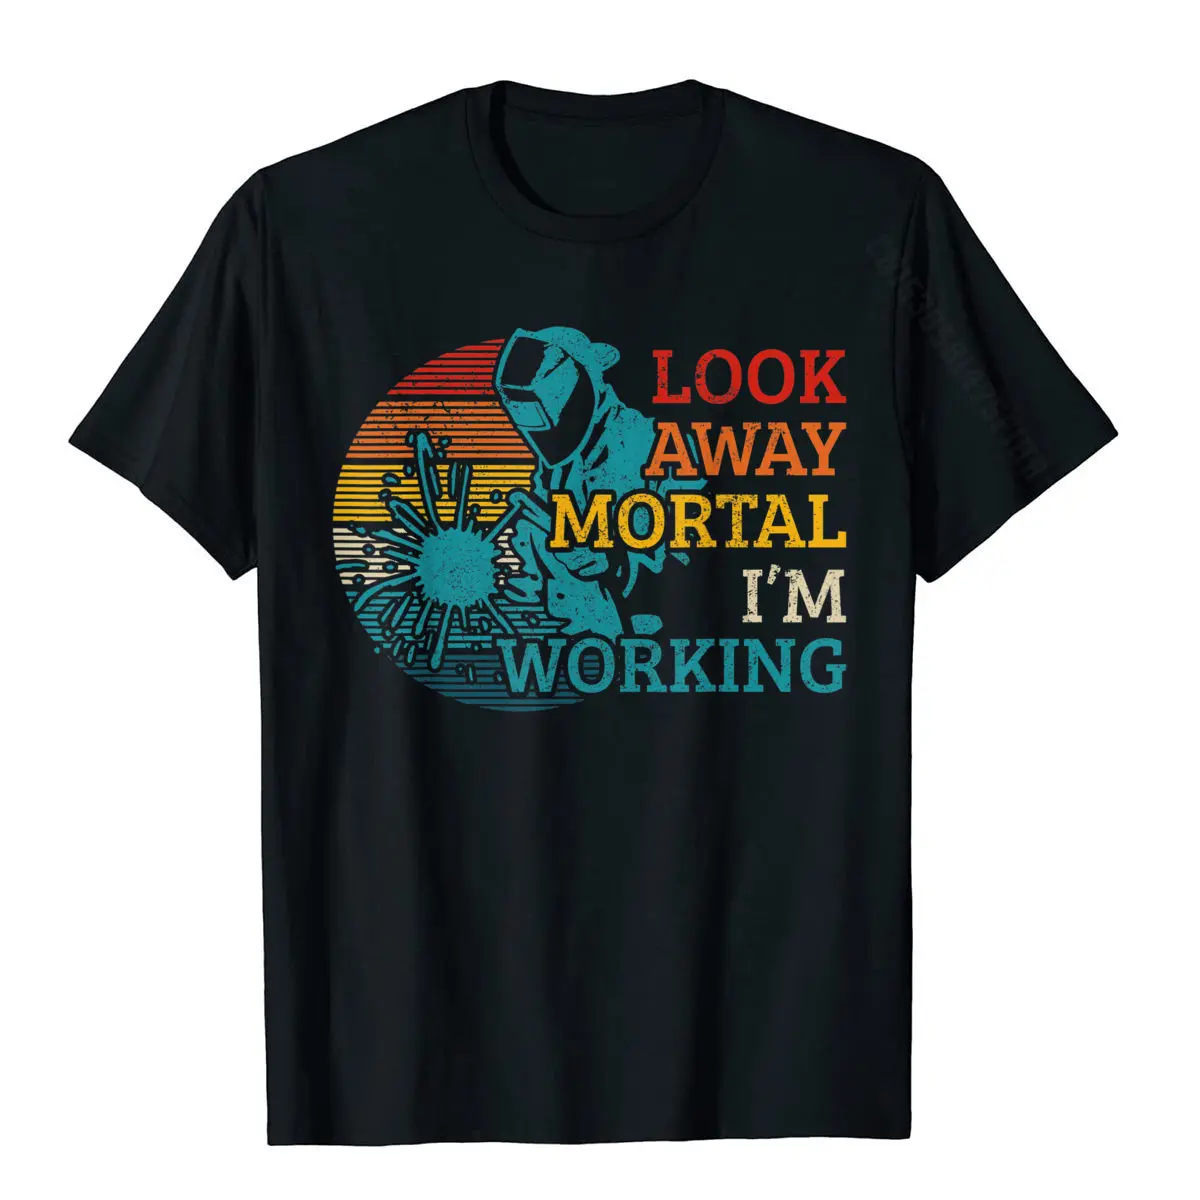 

Mens Funny Welder Look Away Mortal I'm Working Welding Gift T-Shirt Top T-Shirts For Men Printed Tops T Shirt Cute Casual Cotton